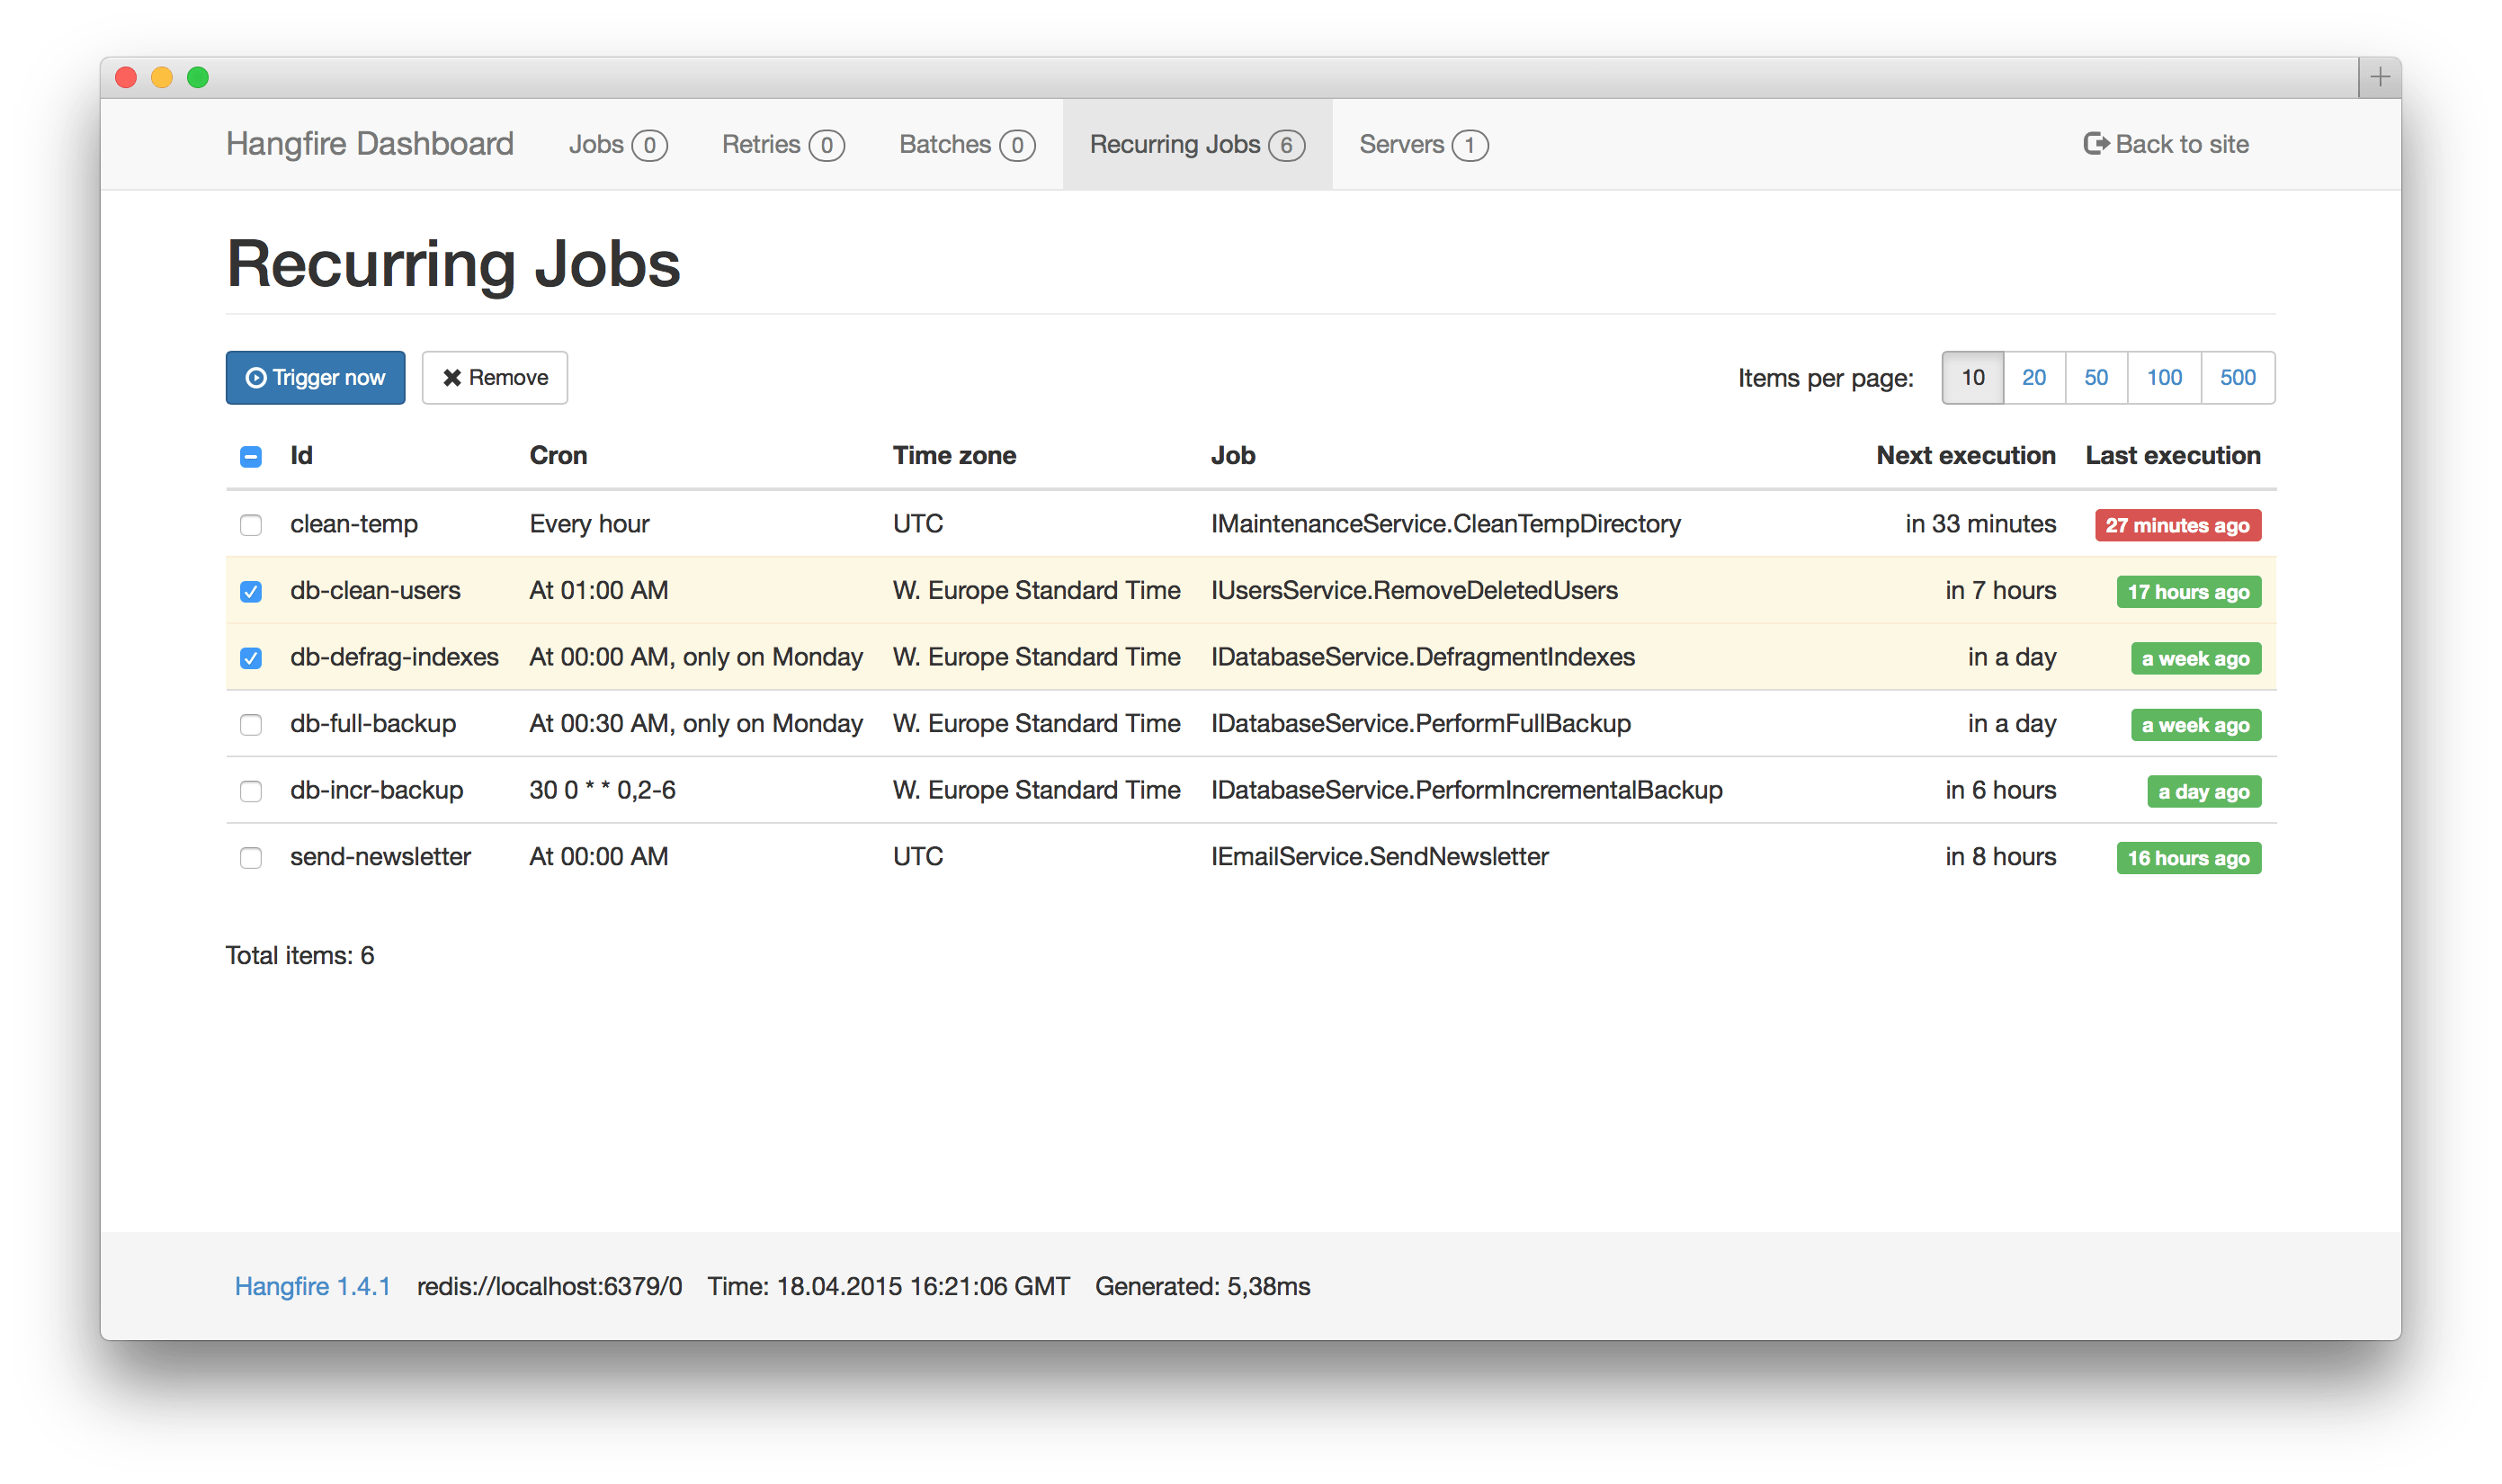 Image of Hangfire.io's recurring jobs screen, showing Execute Now button